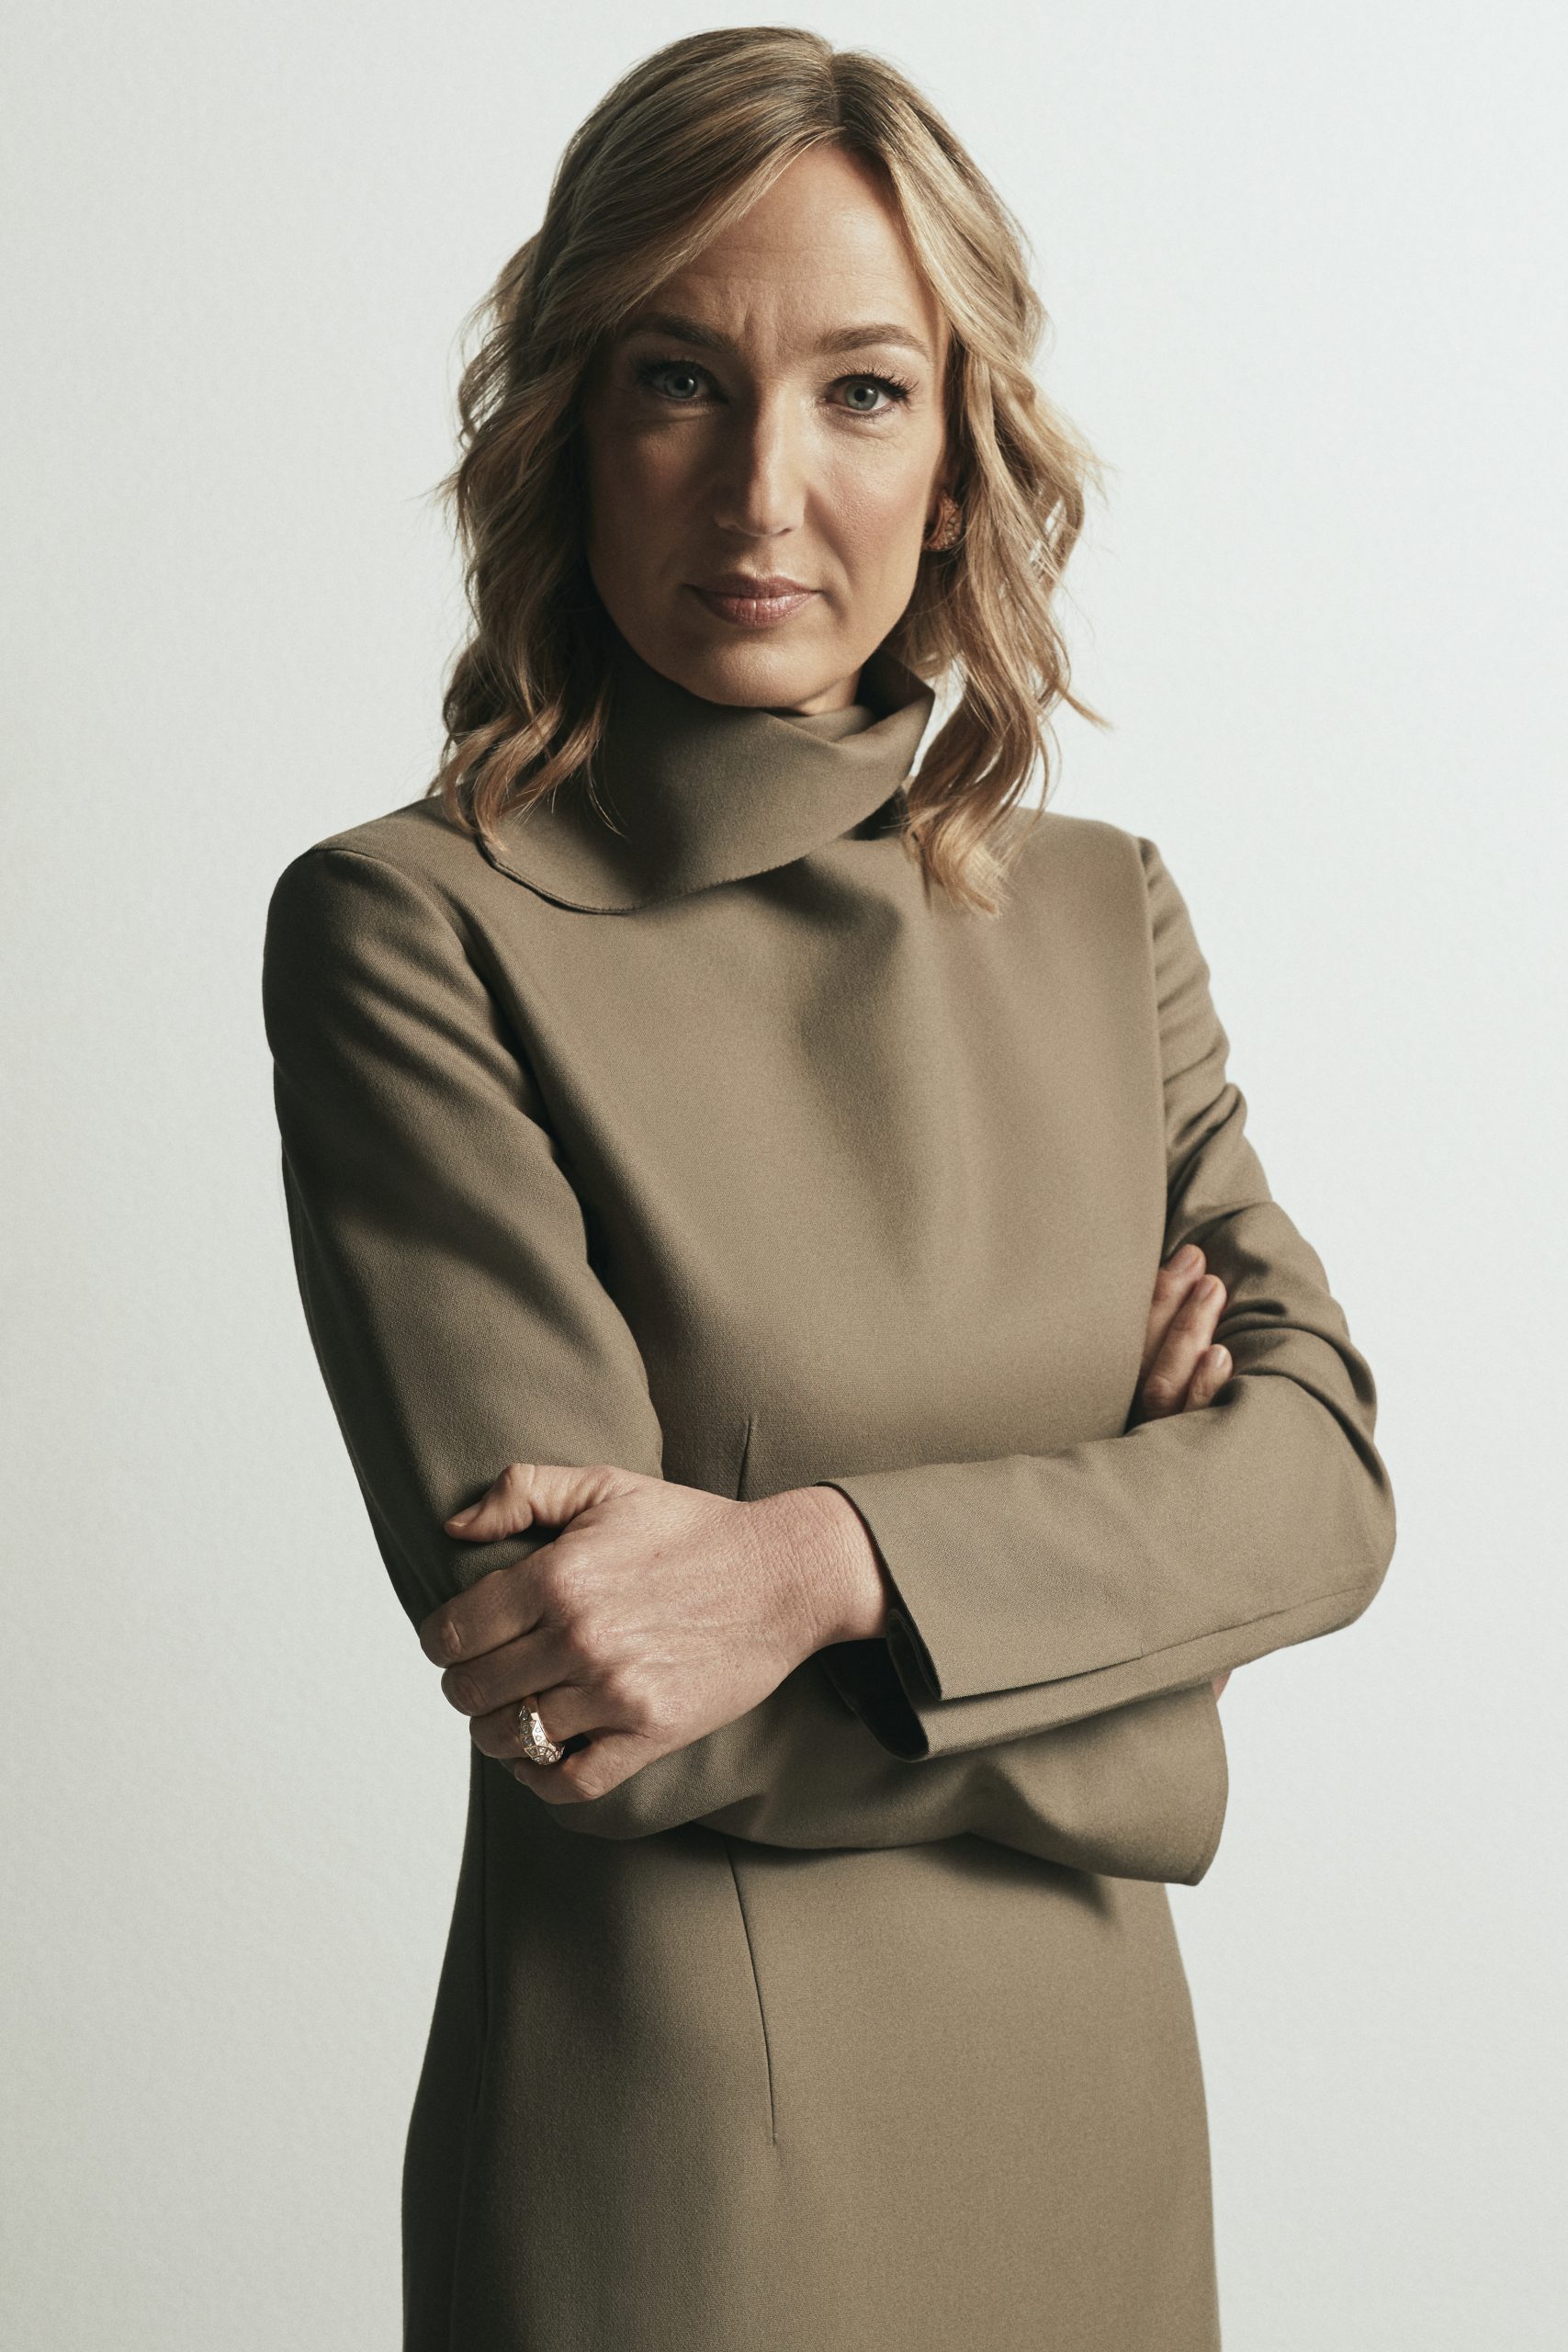 CEO & President of Acqua di Parma Laura Burdese on the beauty of  imperfection - Lux Magazine